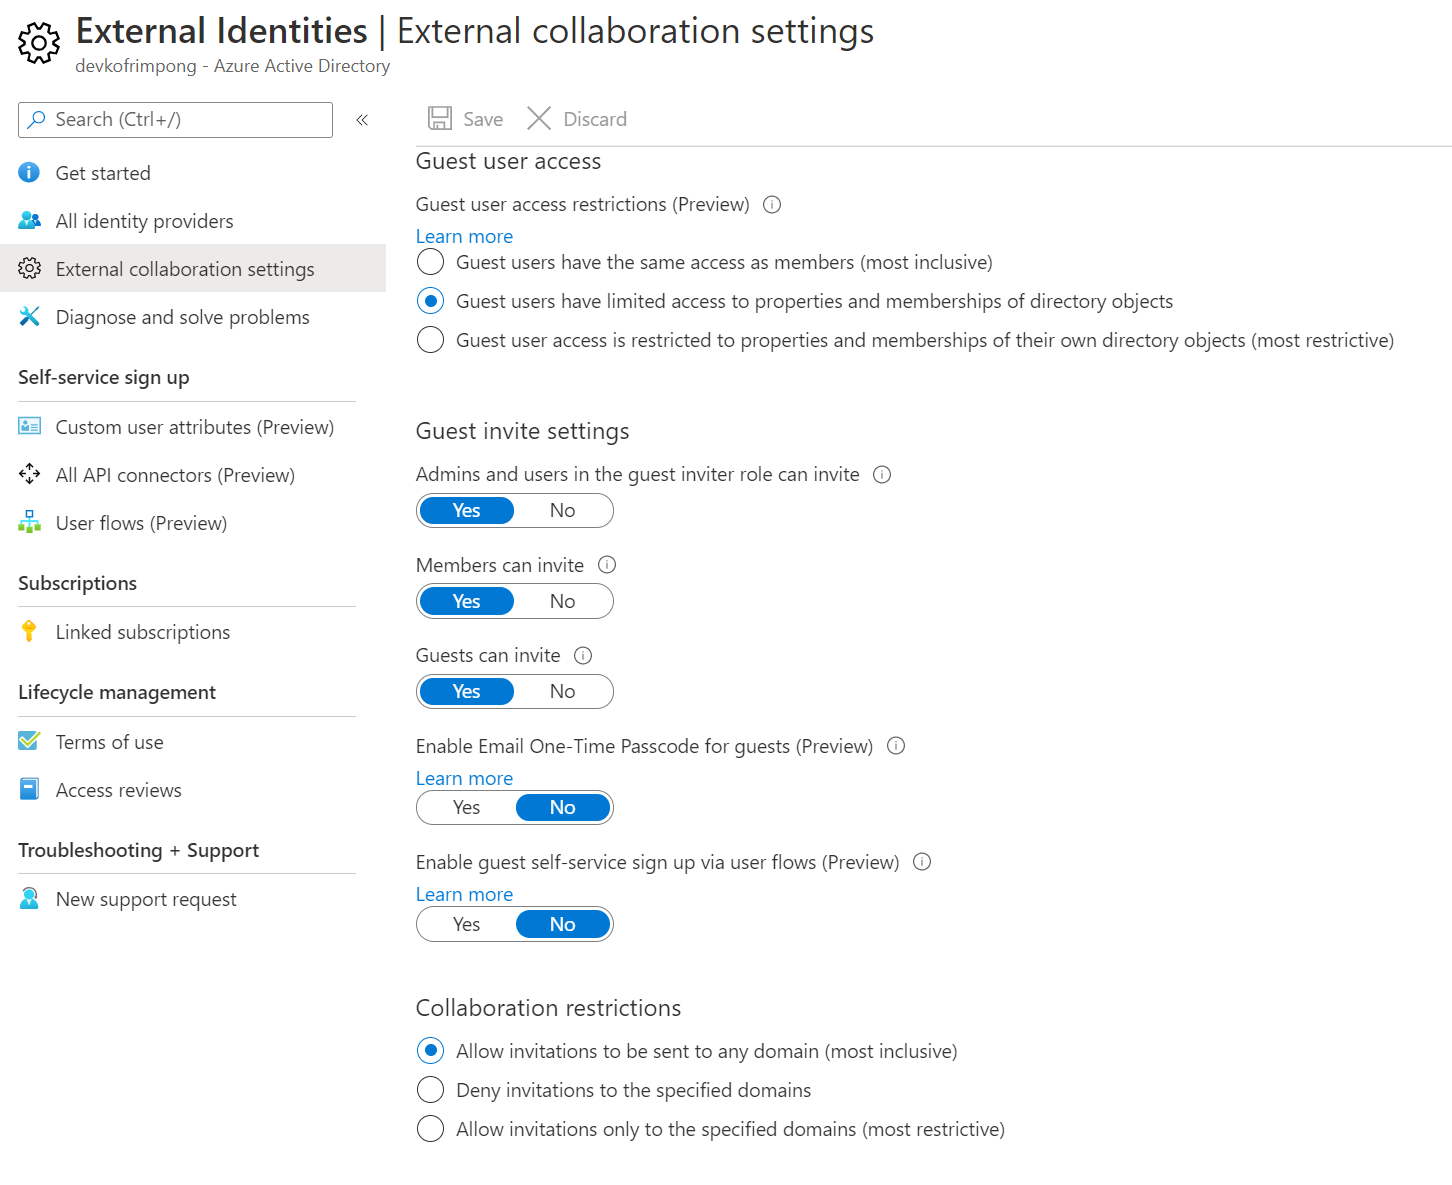 External Sharing in Office 365